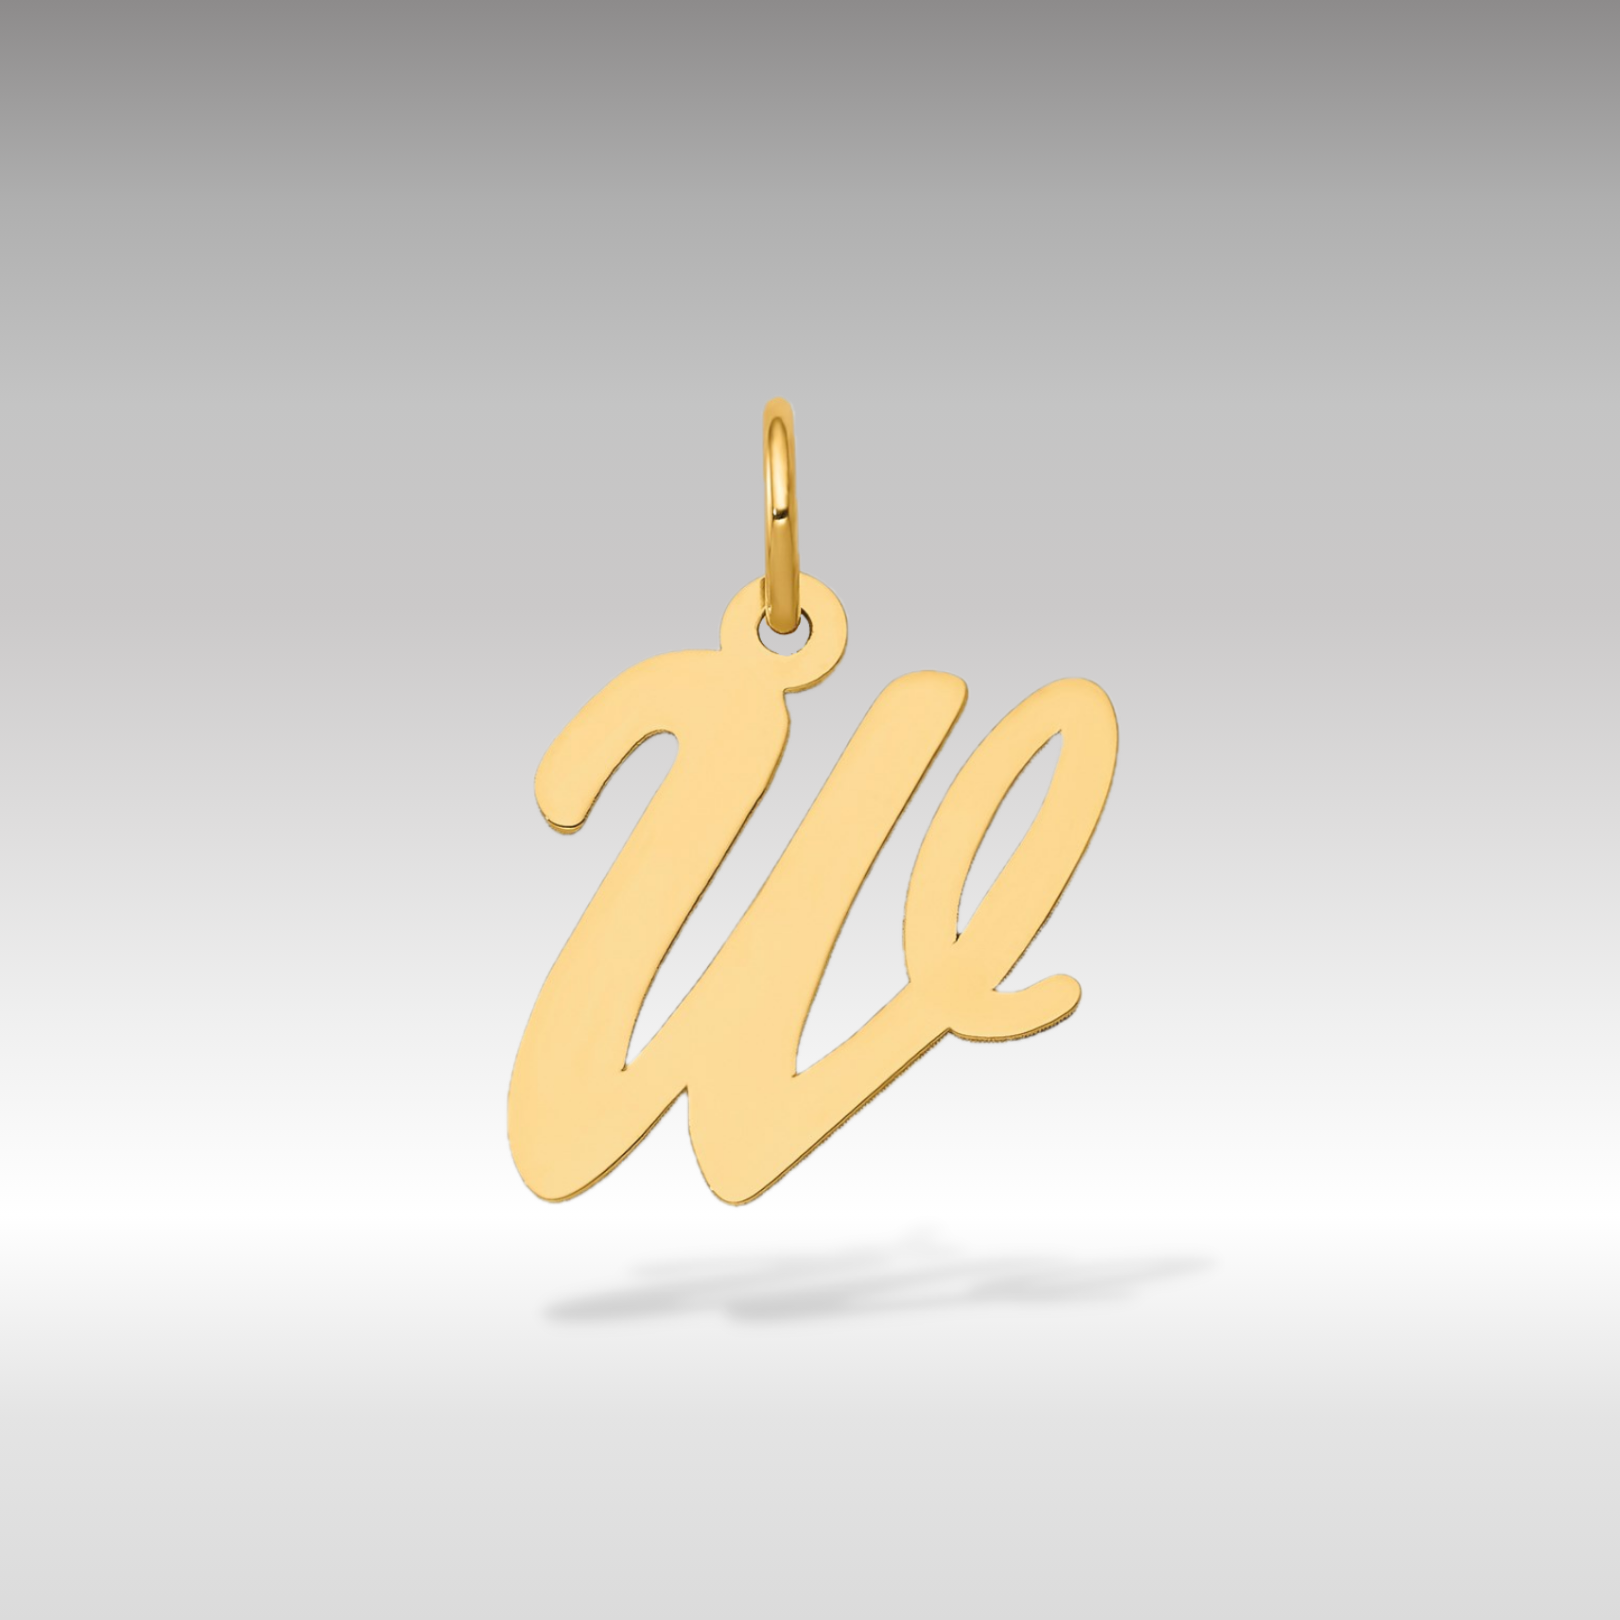 14K Gold Script Letter "W" Initial Pendant - Charlie & Co. Jewelry